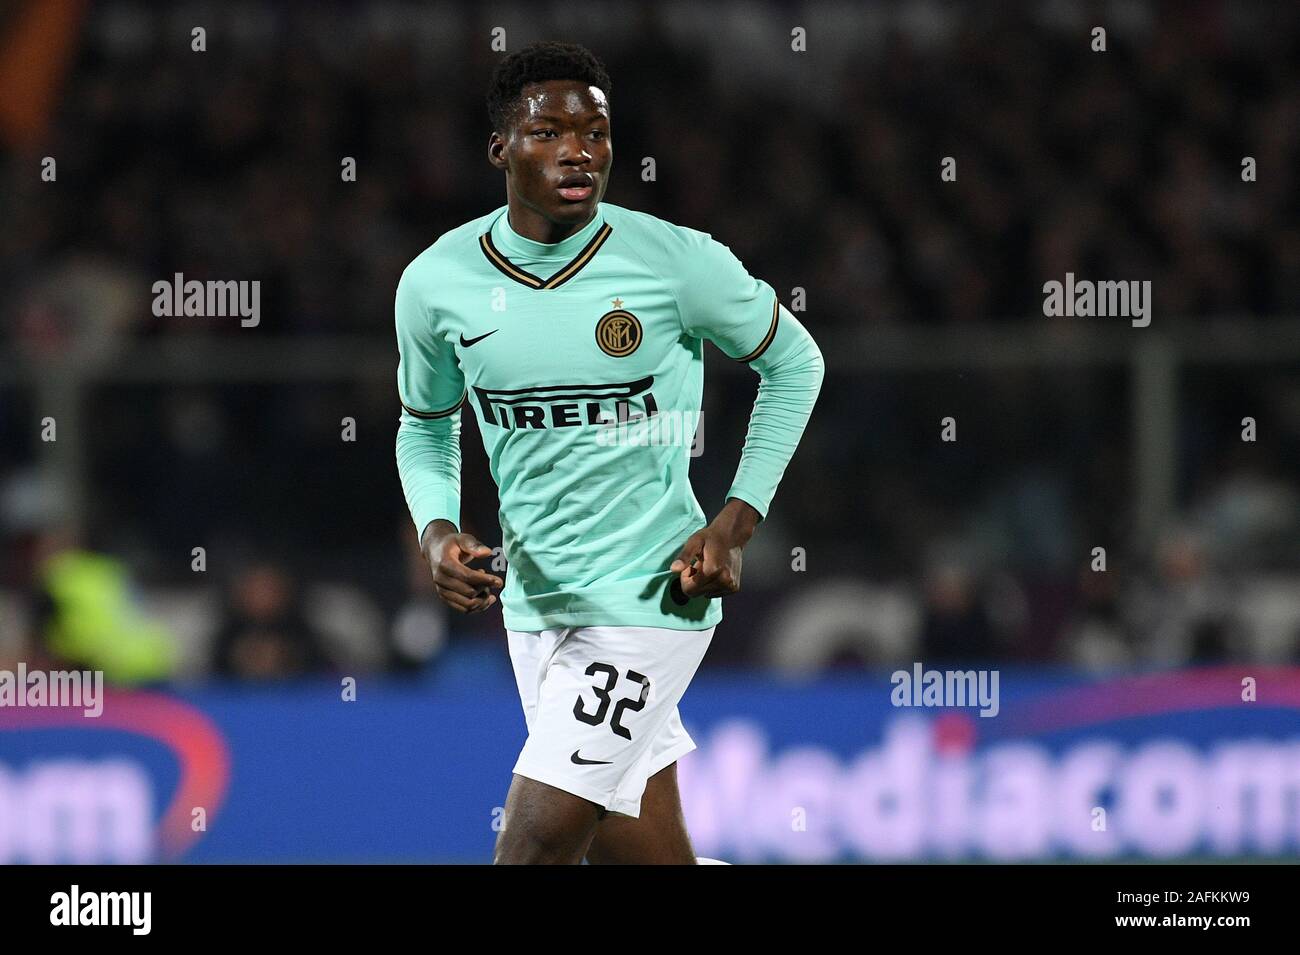 Agoume Al Debutto With La Maglia Of Inter High Resolution Stock Photography  and Images - Alamy